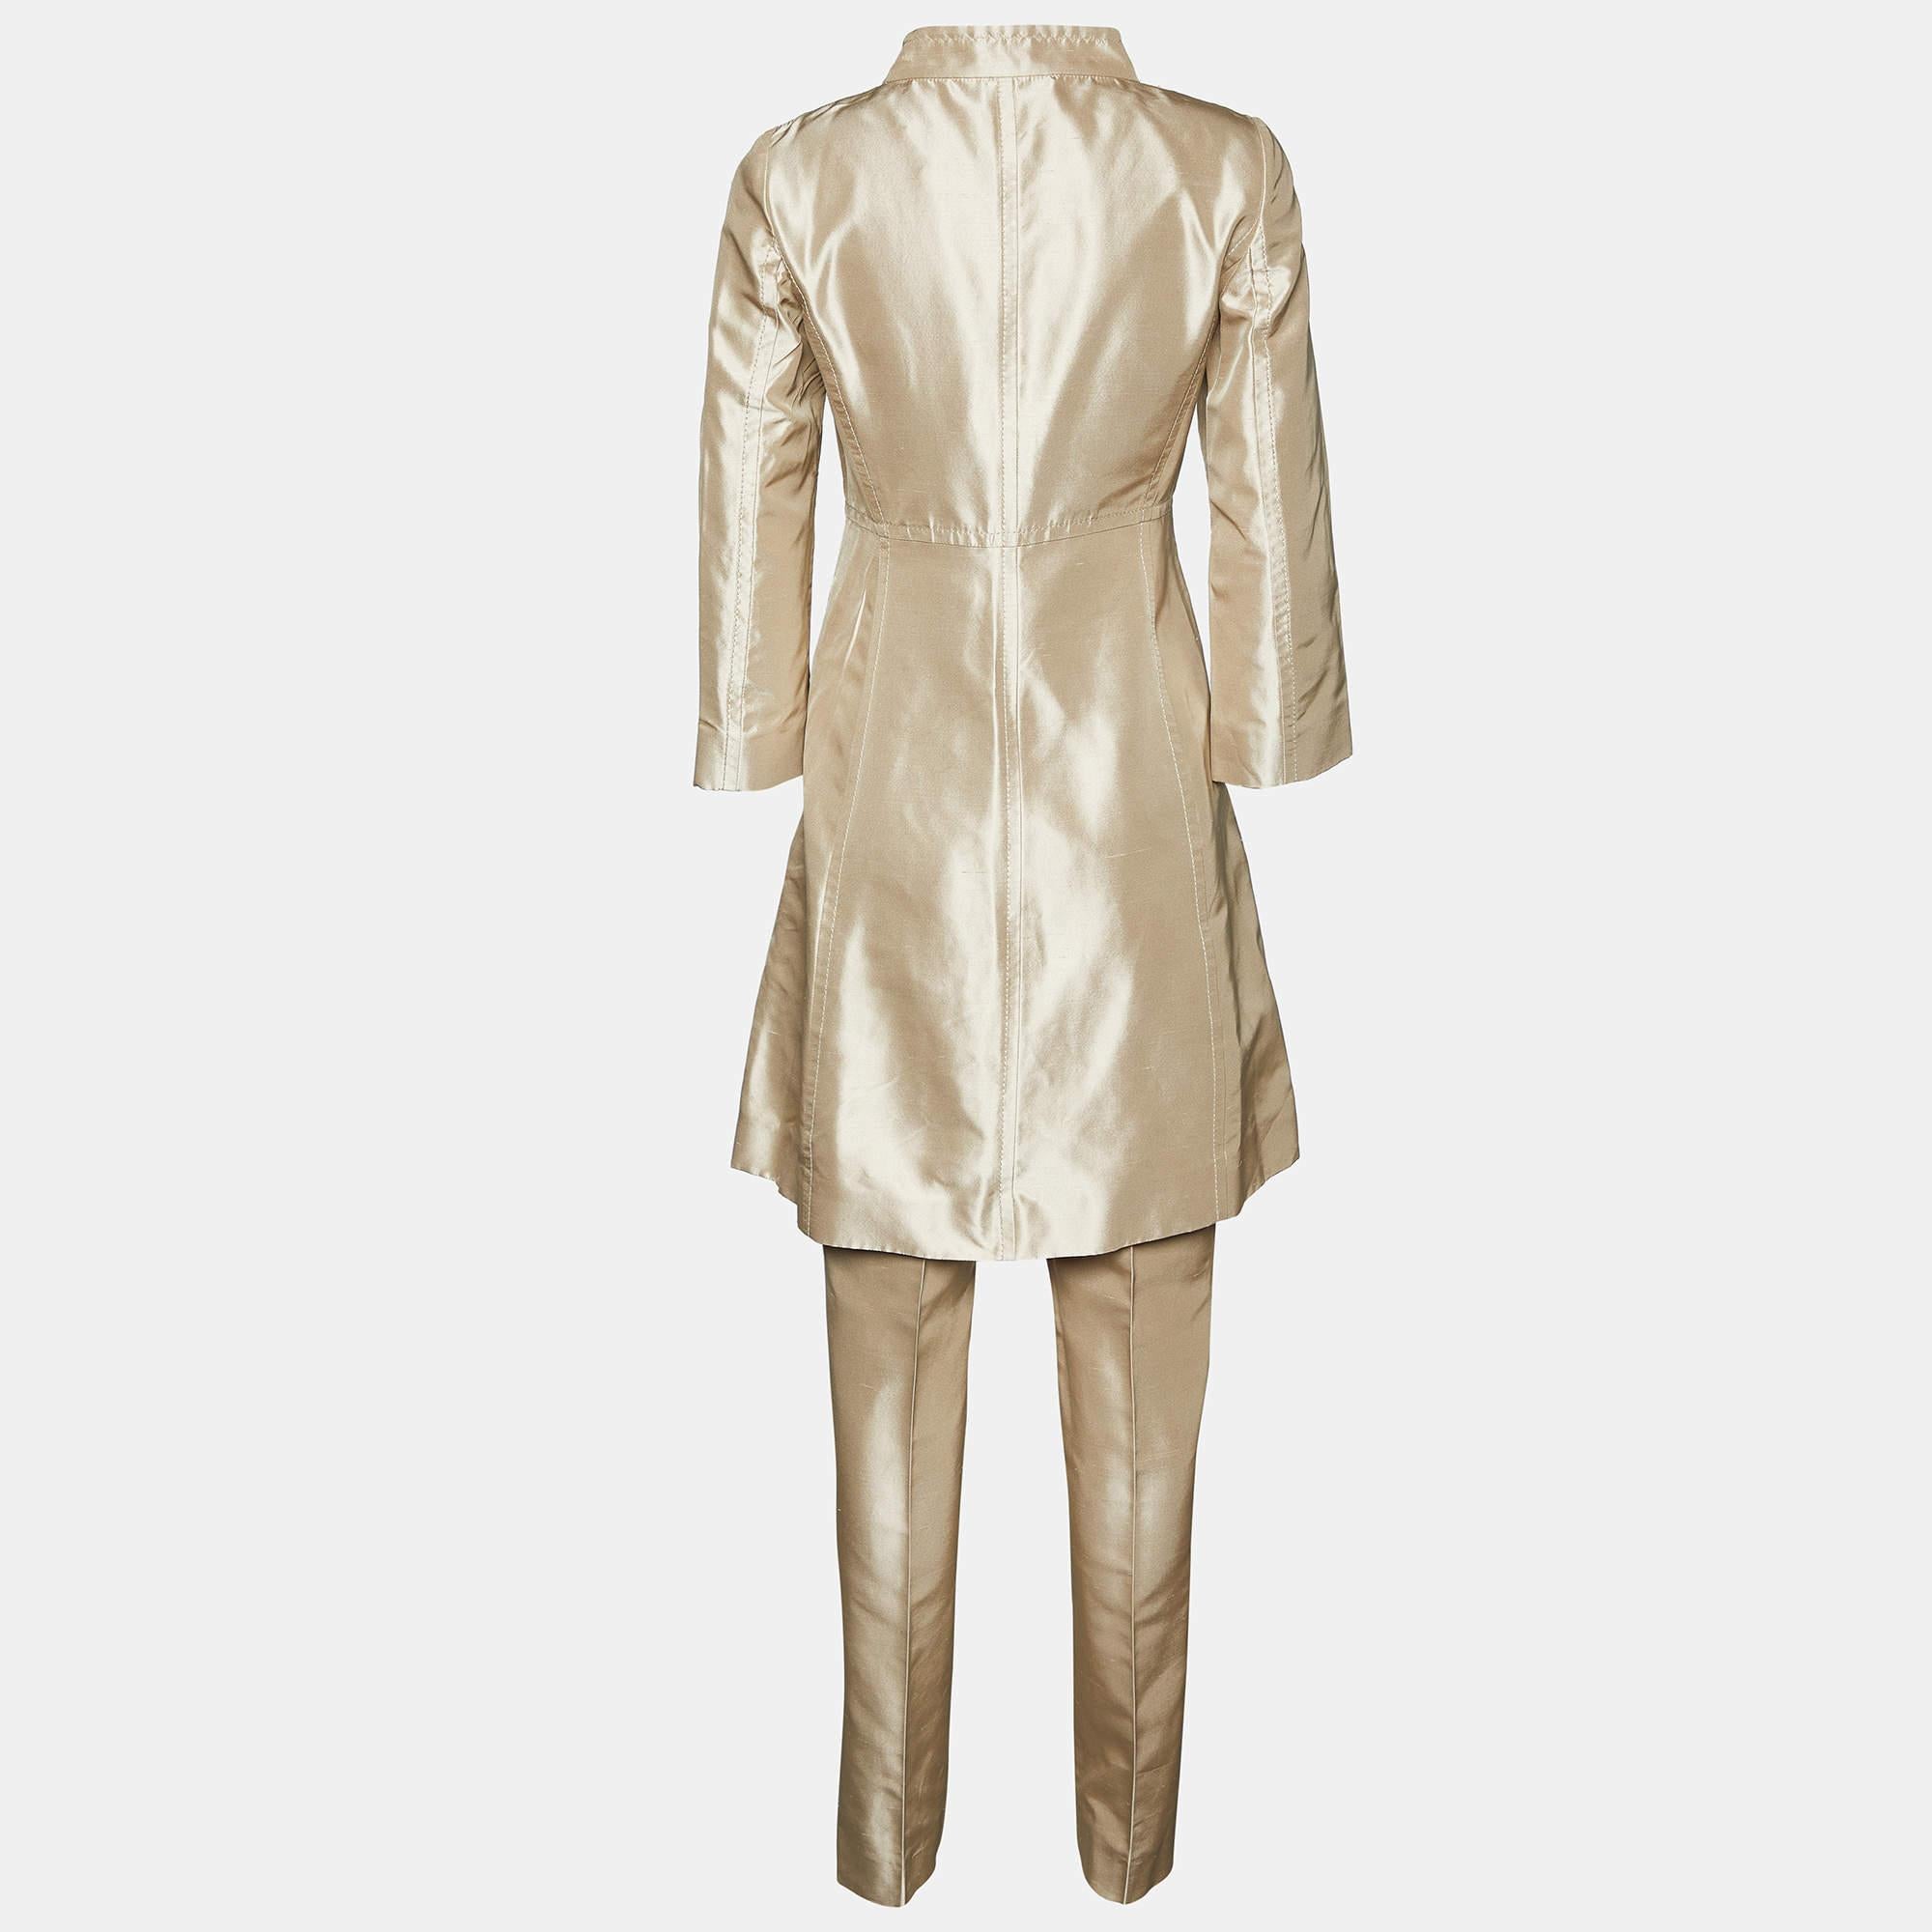 Cruise in style on your way to fashionable outings with this designer coat and pants suit. The luxe Valentino creation is made of fine fabric.

